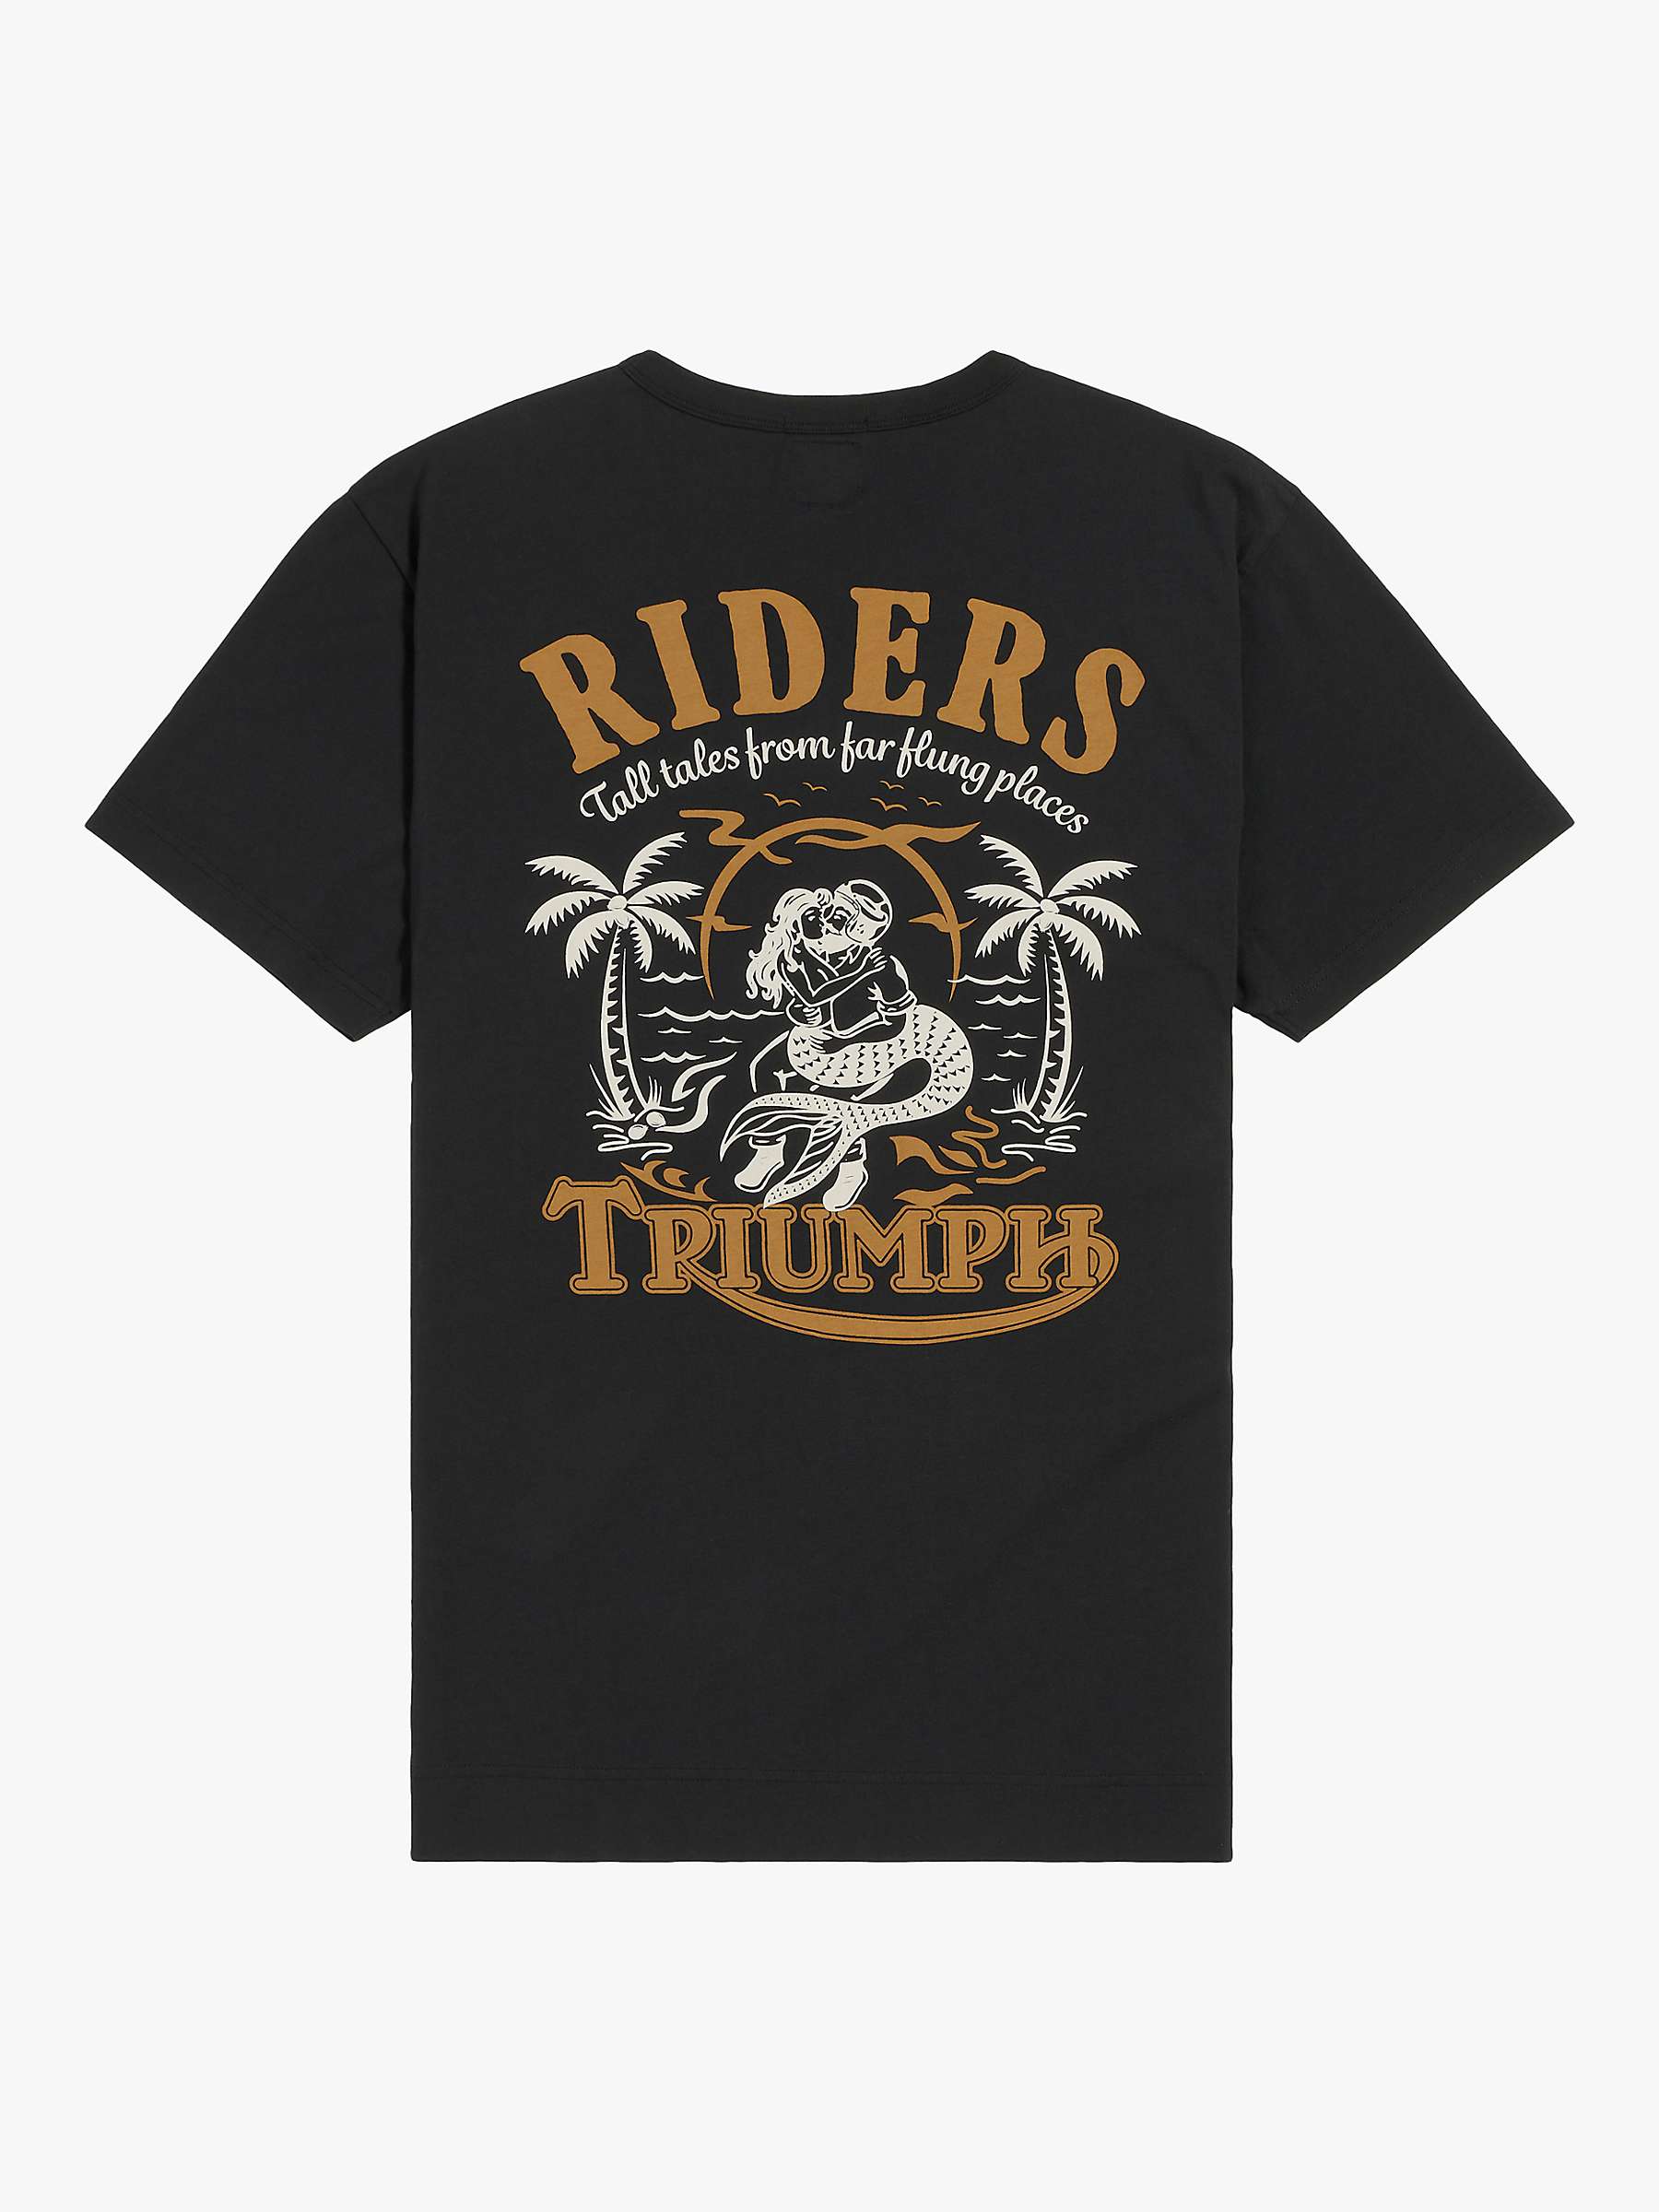 Buy Triumph Motorcycles Tall Tales Graphic T-Shirt Online at johnlewis.com